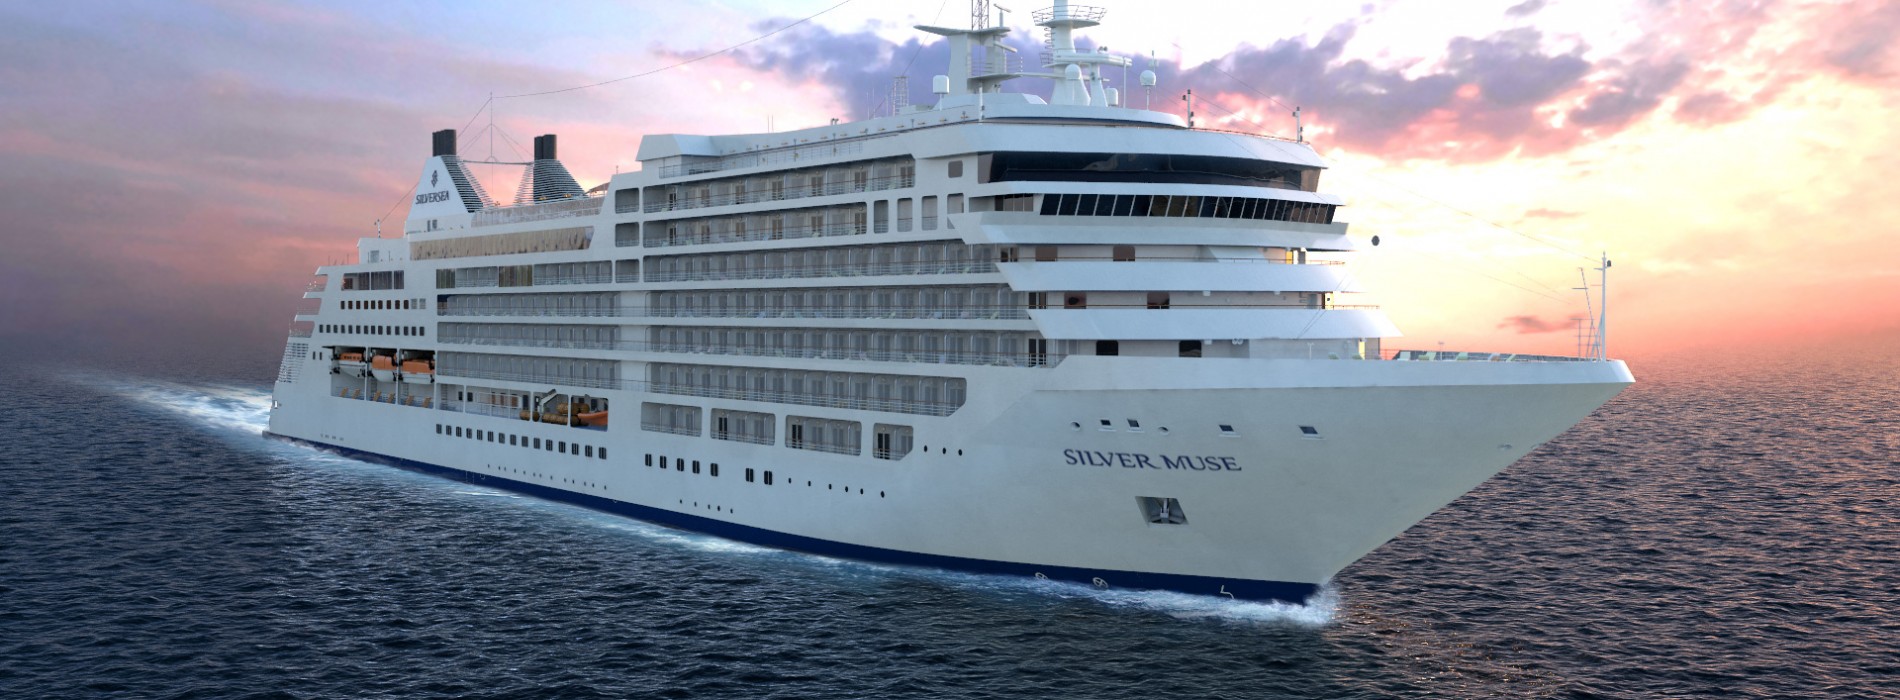 Royal Caribbean Cruises to purchase 67% stake in Silversea Cruises